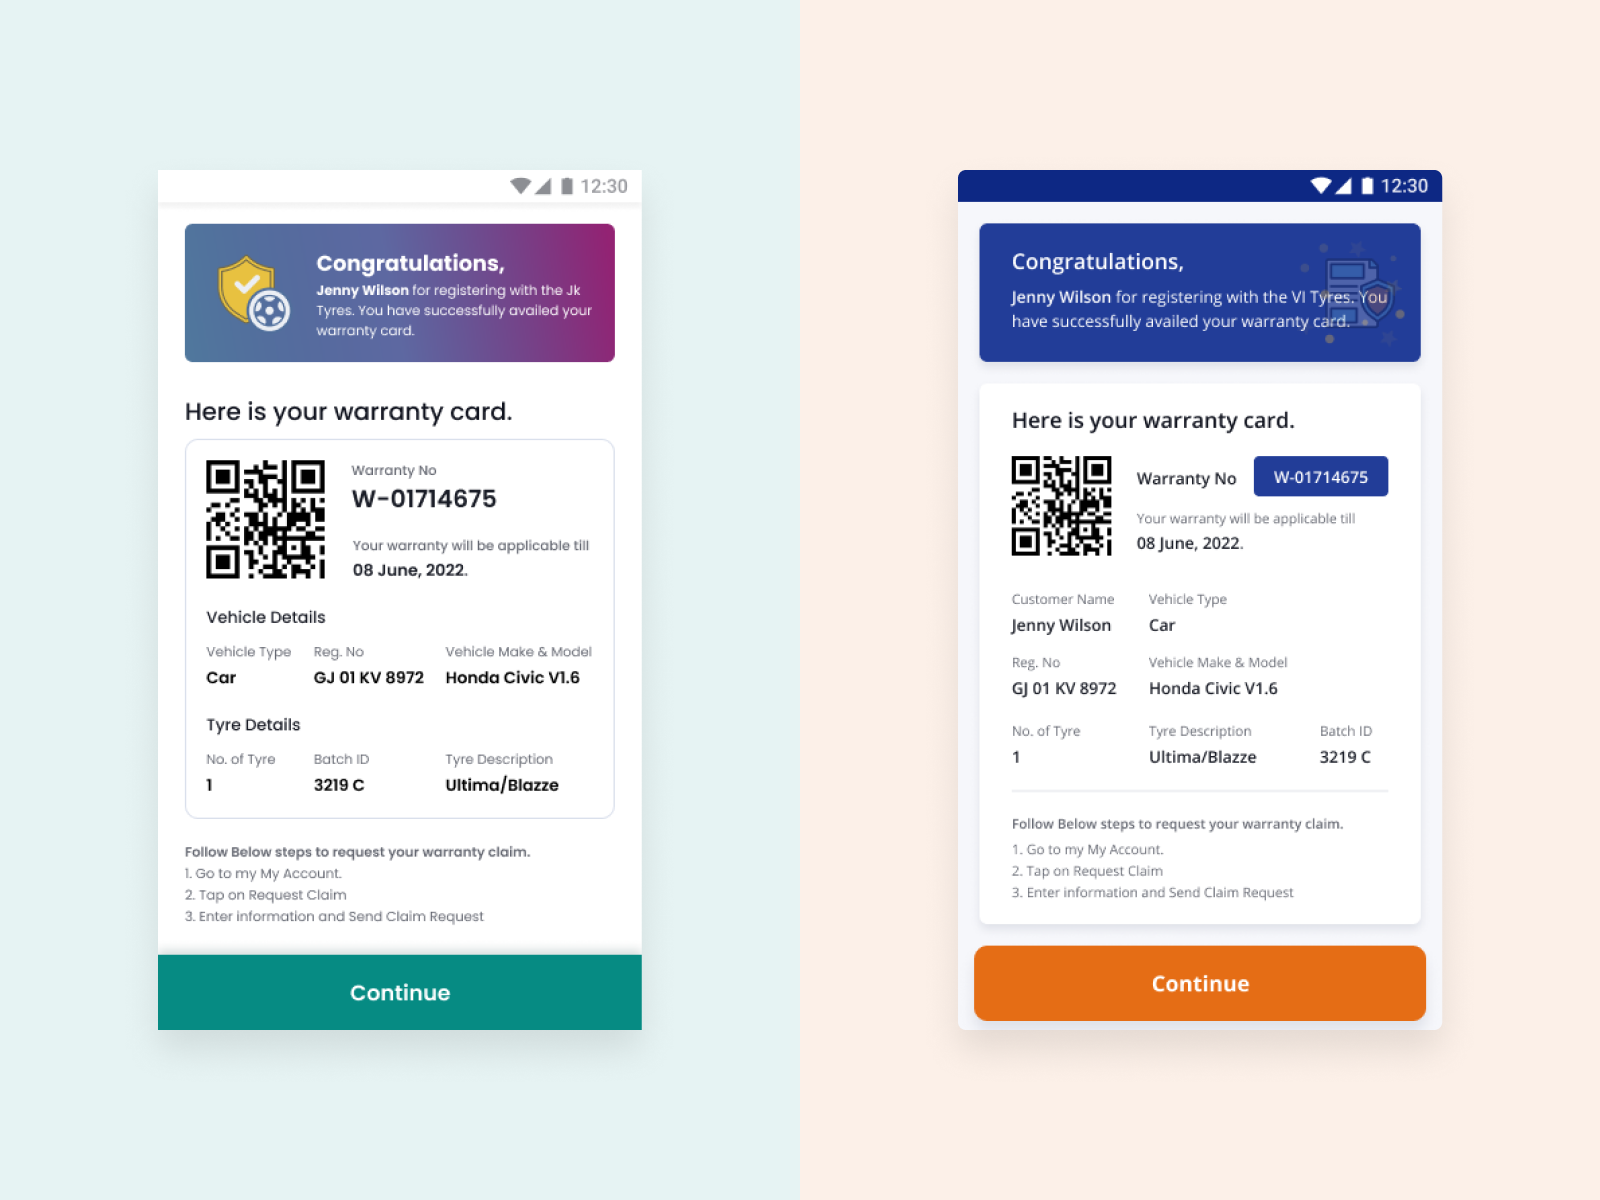 Mobile Warranty Card - Explorations by Aman Gupta on Dribbble